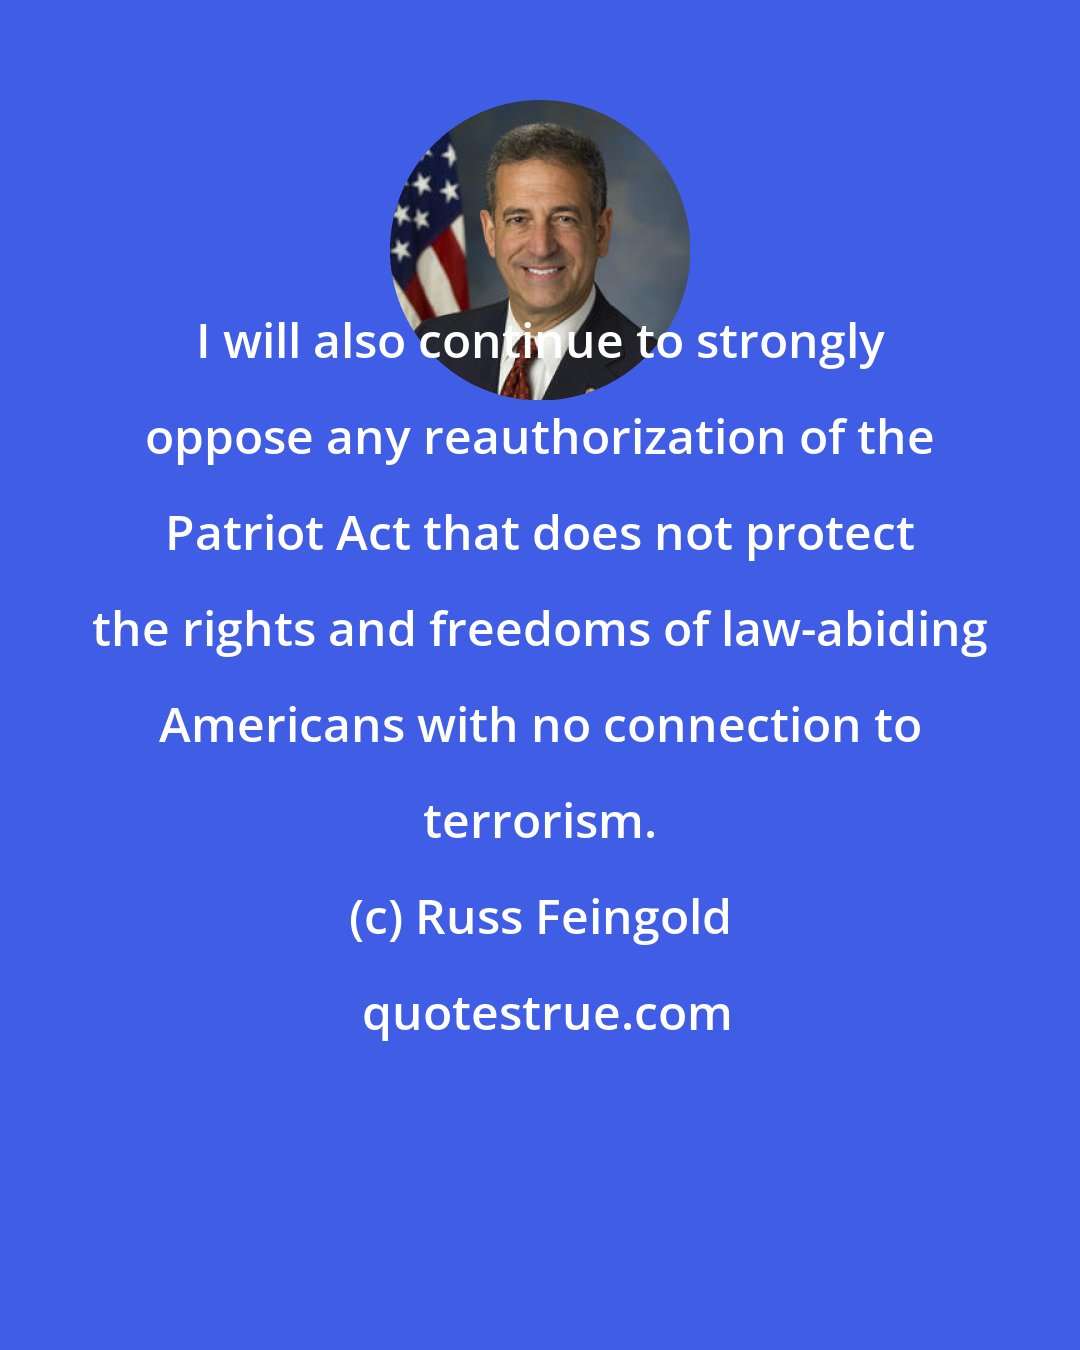 Russ Feingold: I will also continue to strongly oppose any reauthorization of the Patriot Act that does not protect the rights and freedoms of law-abiding Americans with no connection to terrorism.